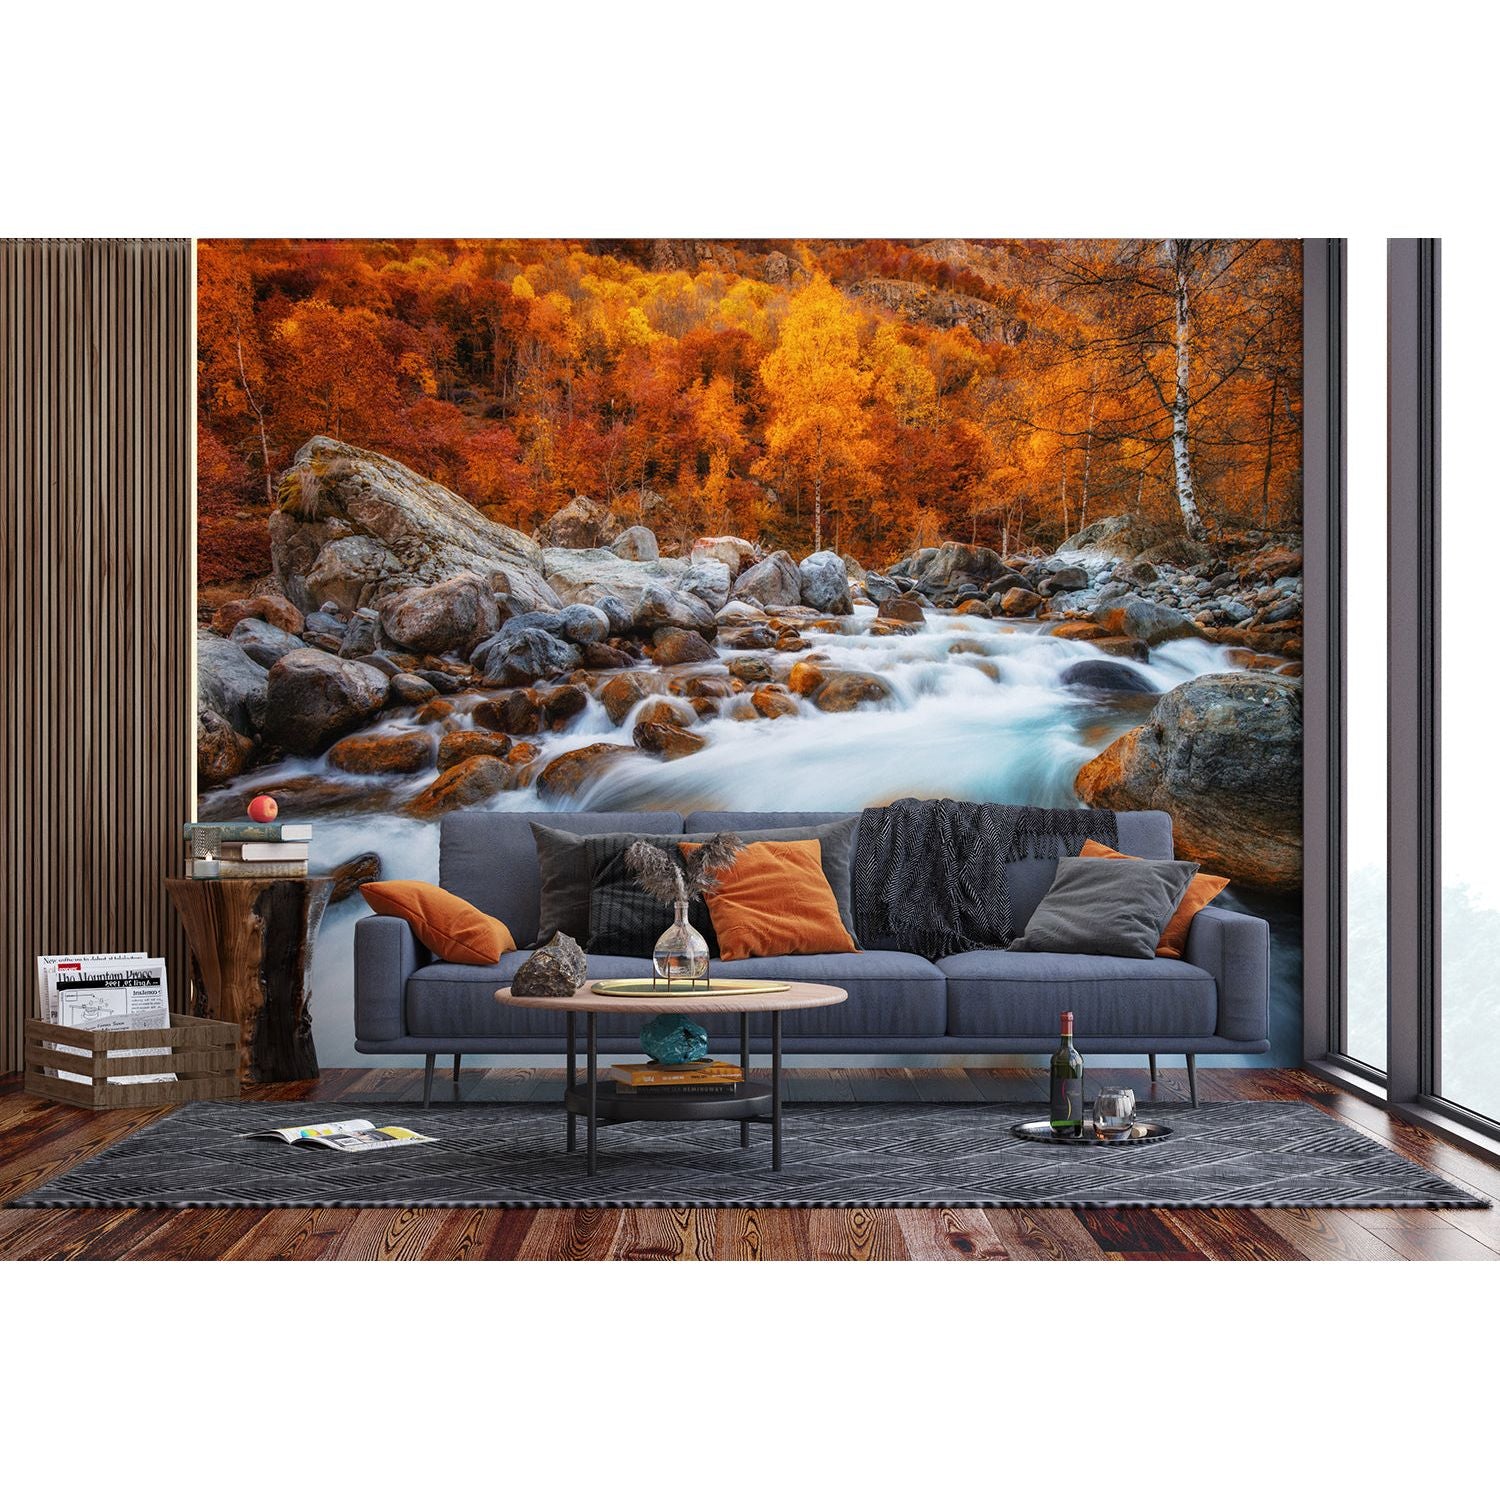 Rushing River: Forest Wall Mural